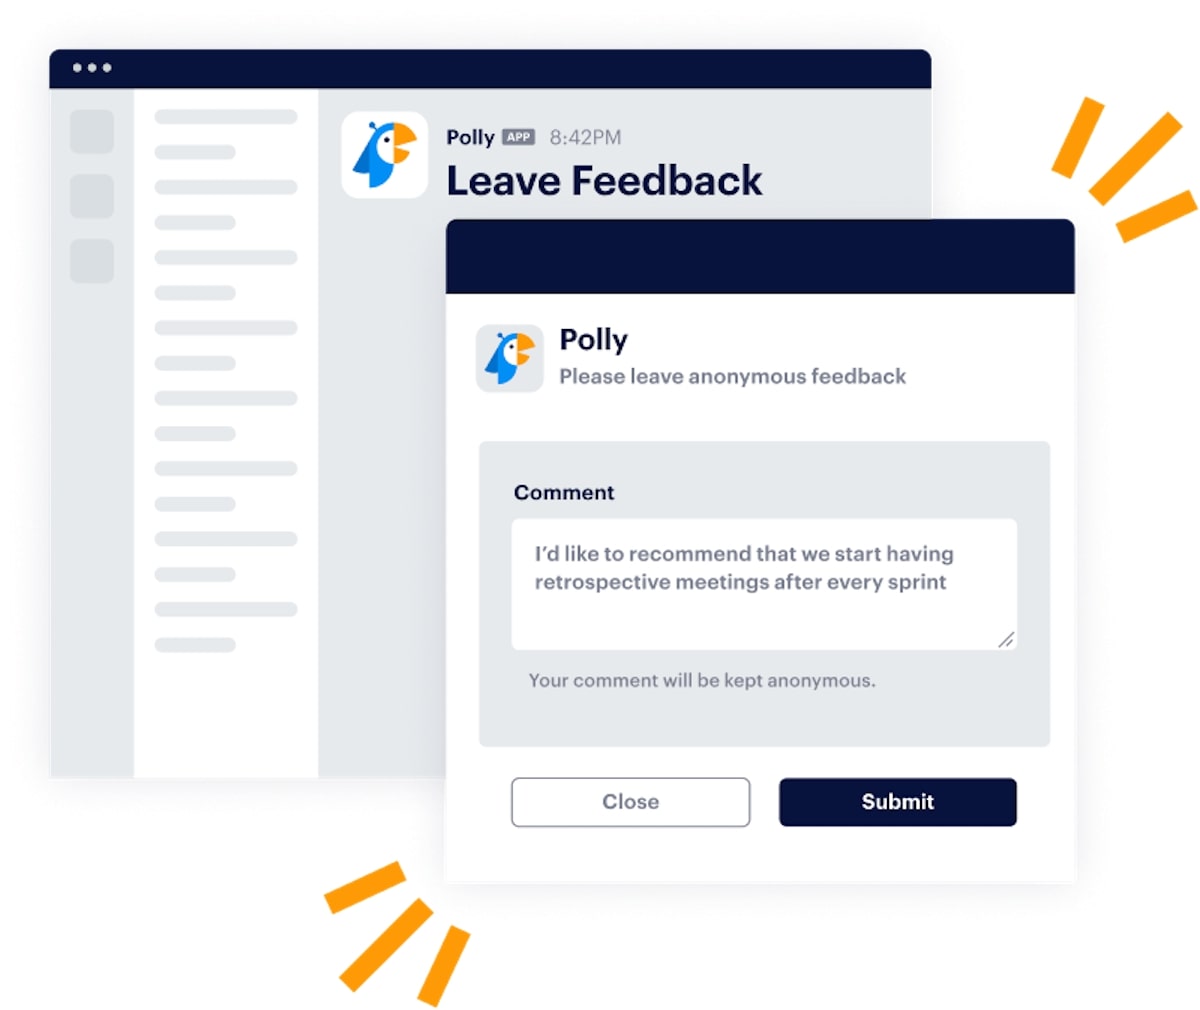 Live poll: Polly Leave Feedback